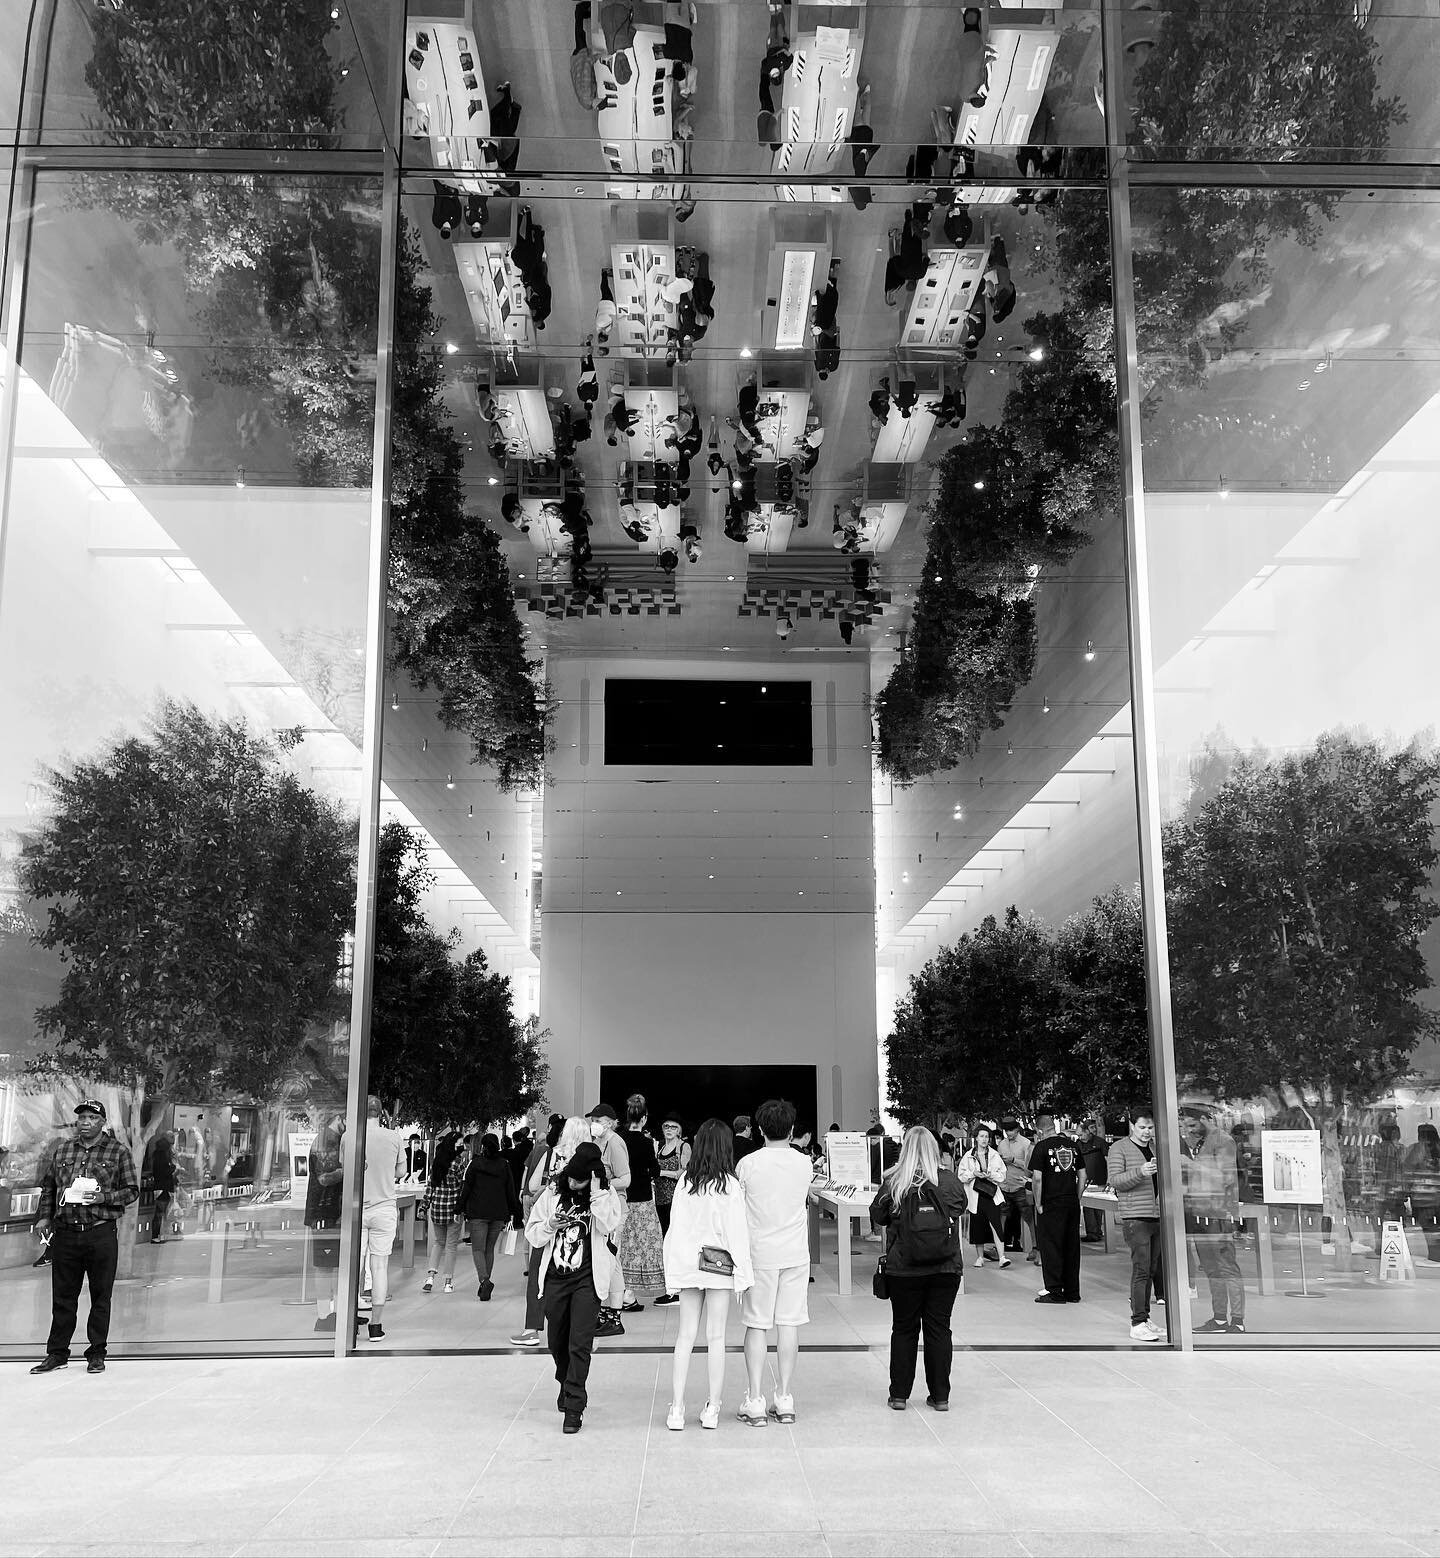 The new Apple store at The Grove in Los Angeles is a reimagined brand experience. Apple has always done an incredible job integrating their brand into every single touchpoint including guest experience, packaging, product and service. This store has 